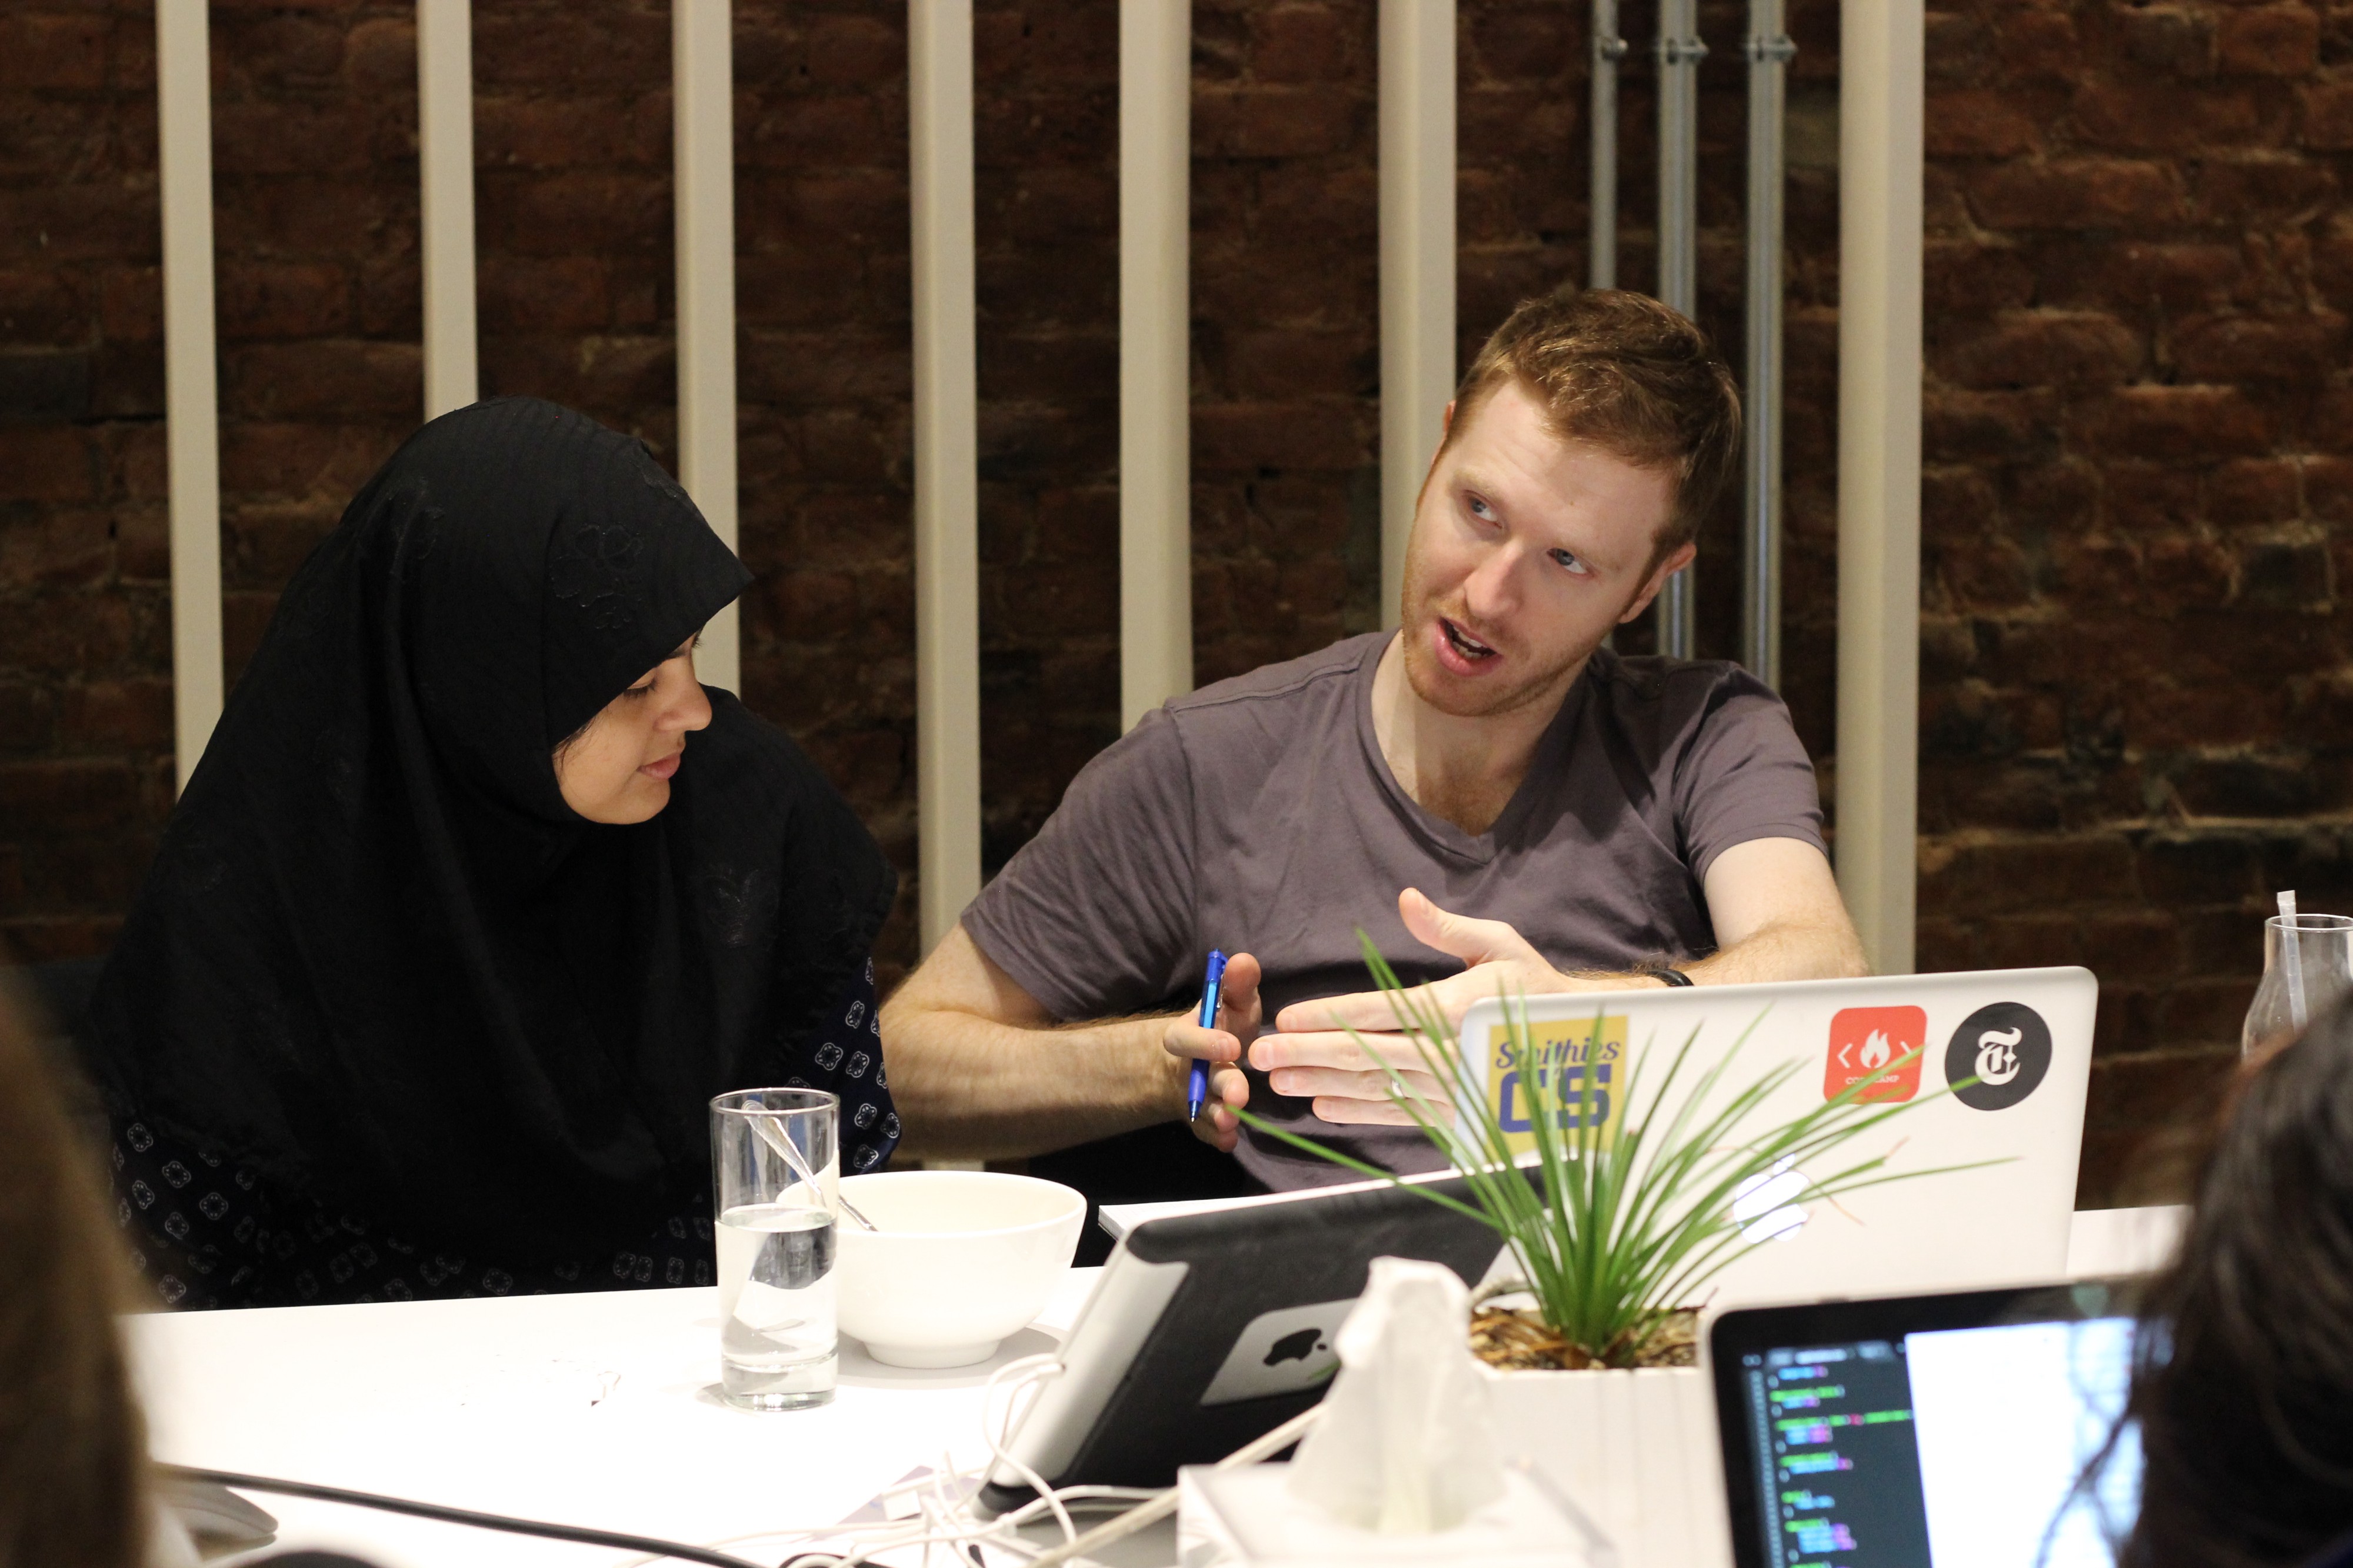 Zainab (left) and Nick (right) talking serious business.